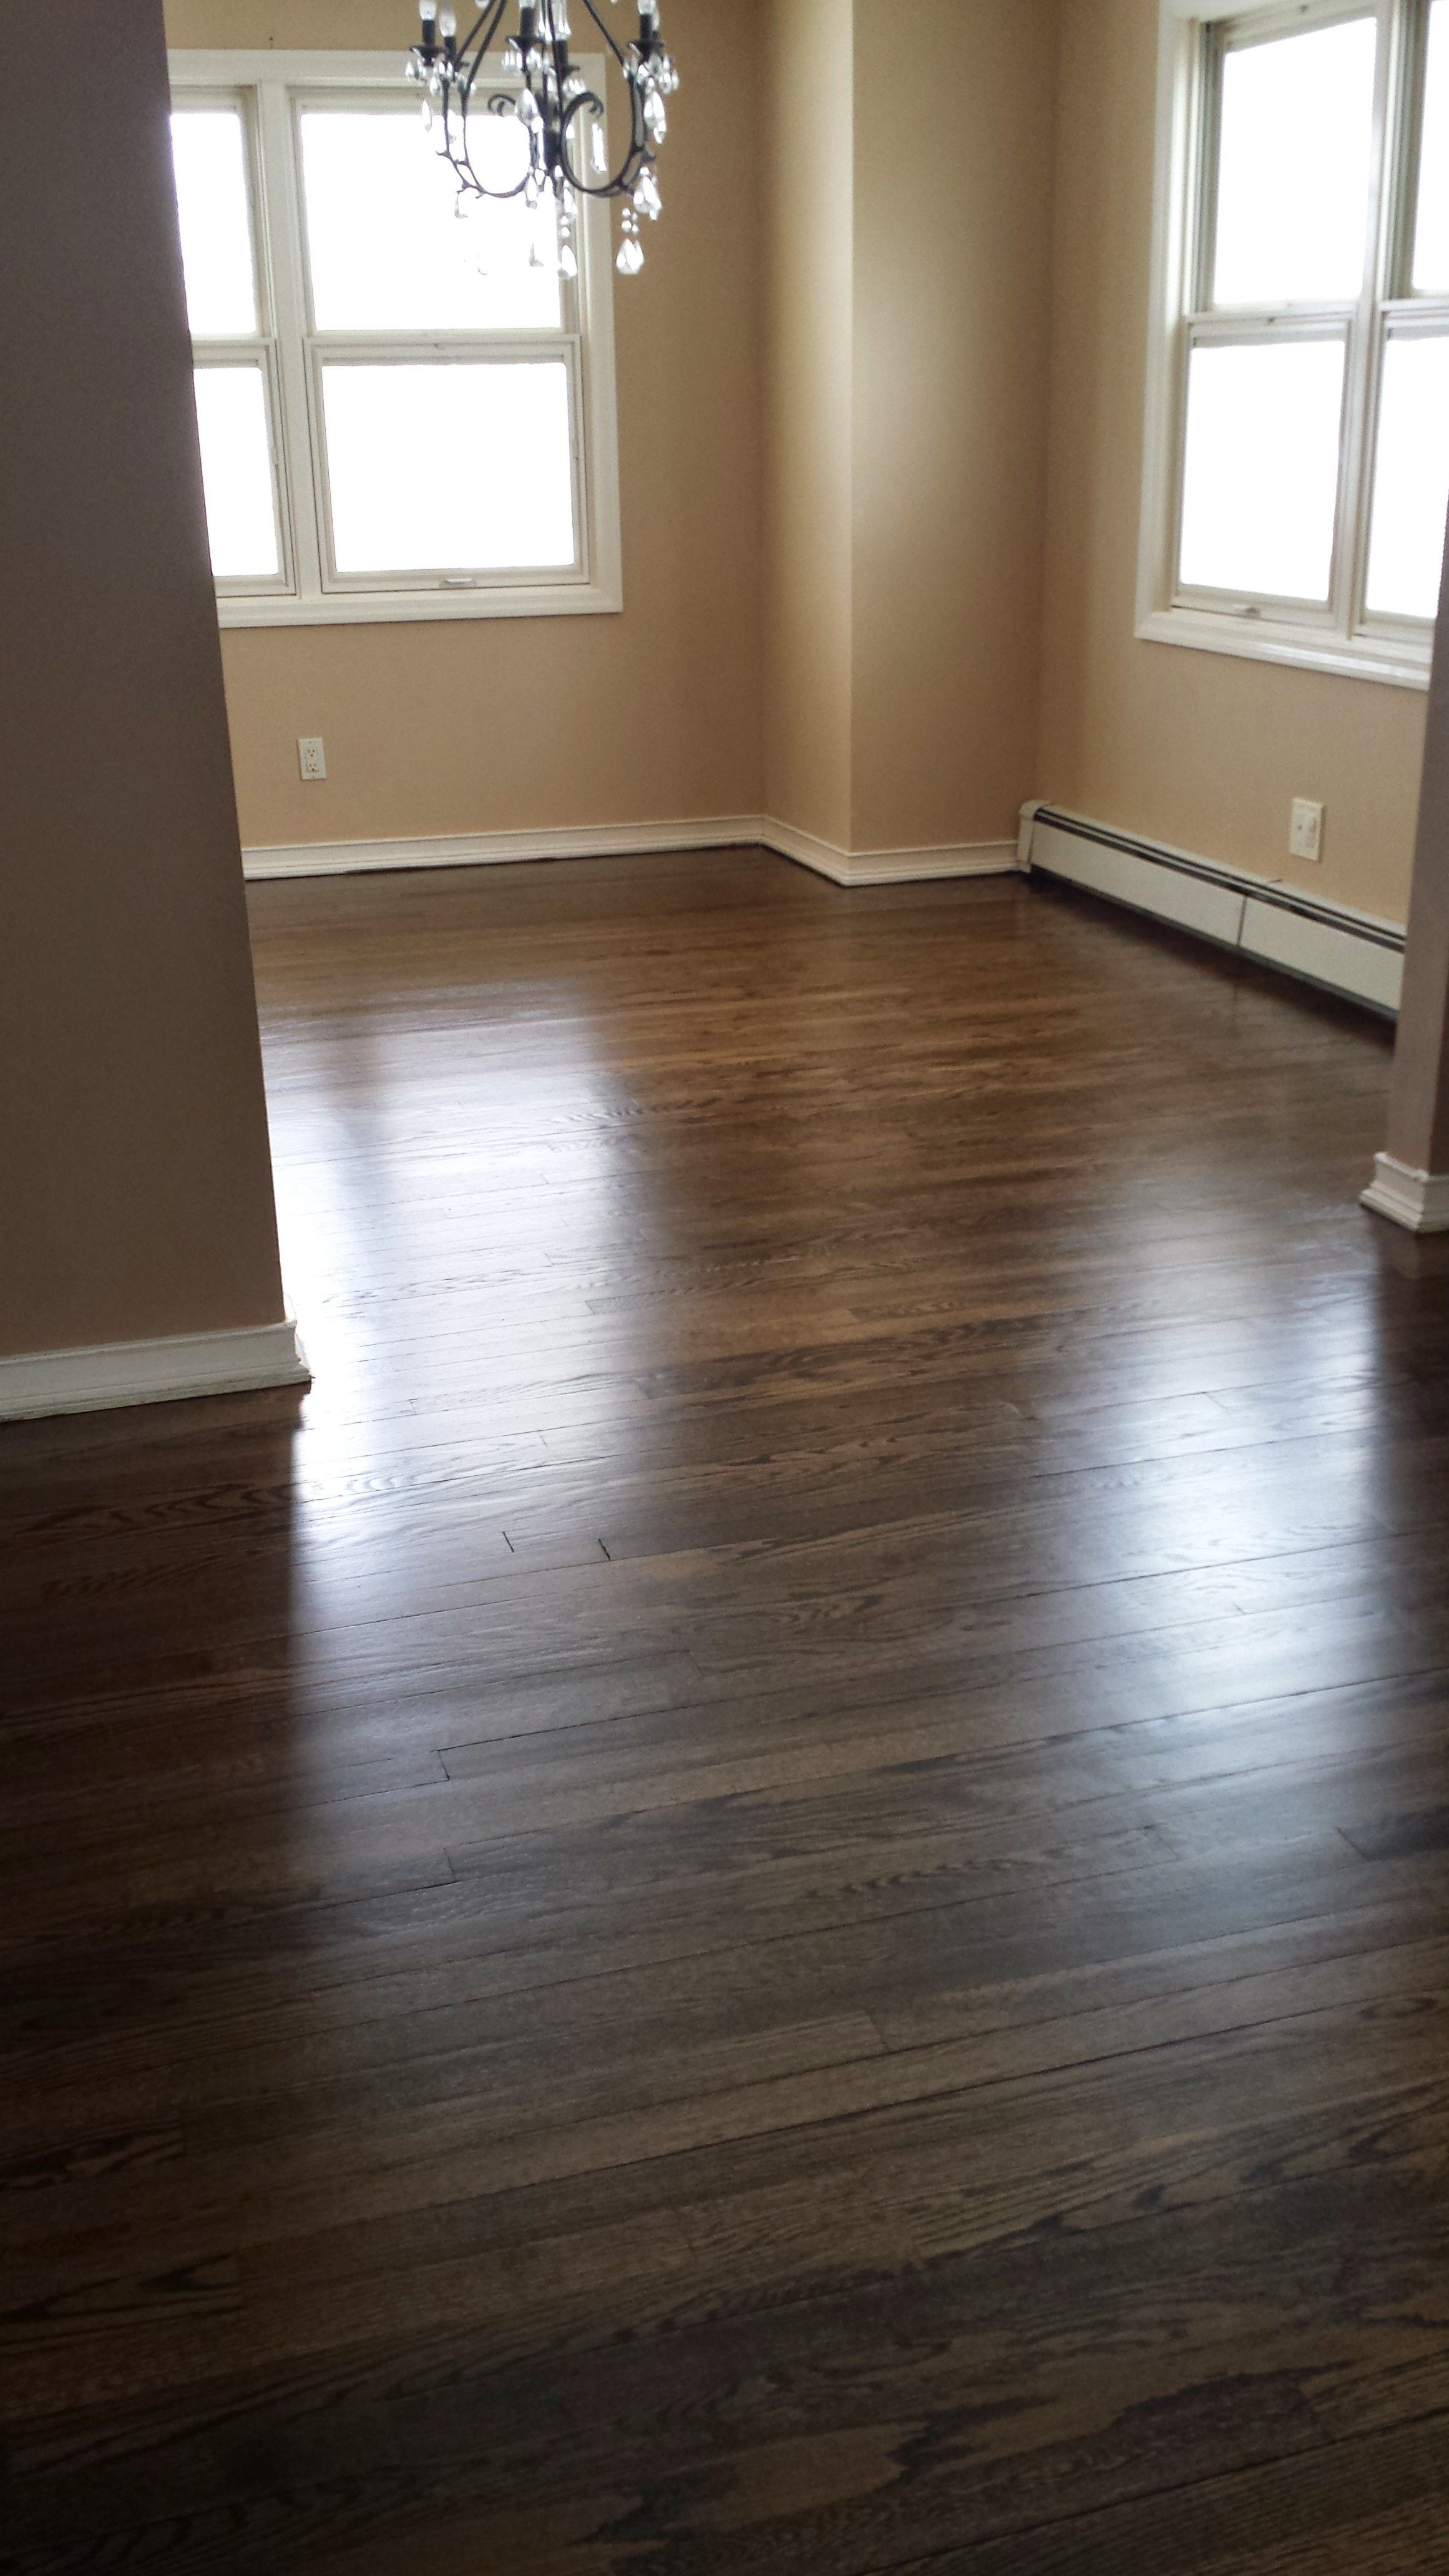 29 Stunning Pictures Of Light Colored Hardwood Floors 2024 free download pictures of light colored hardwood floors of hardwood floor refinishing is an affordable way to spruce up your in hardwood floor refinishing is an affordable way to spruce up your space with